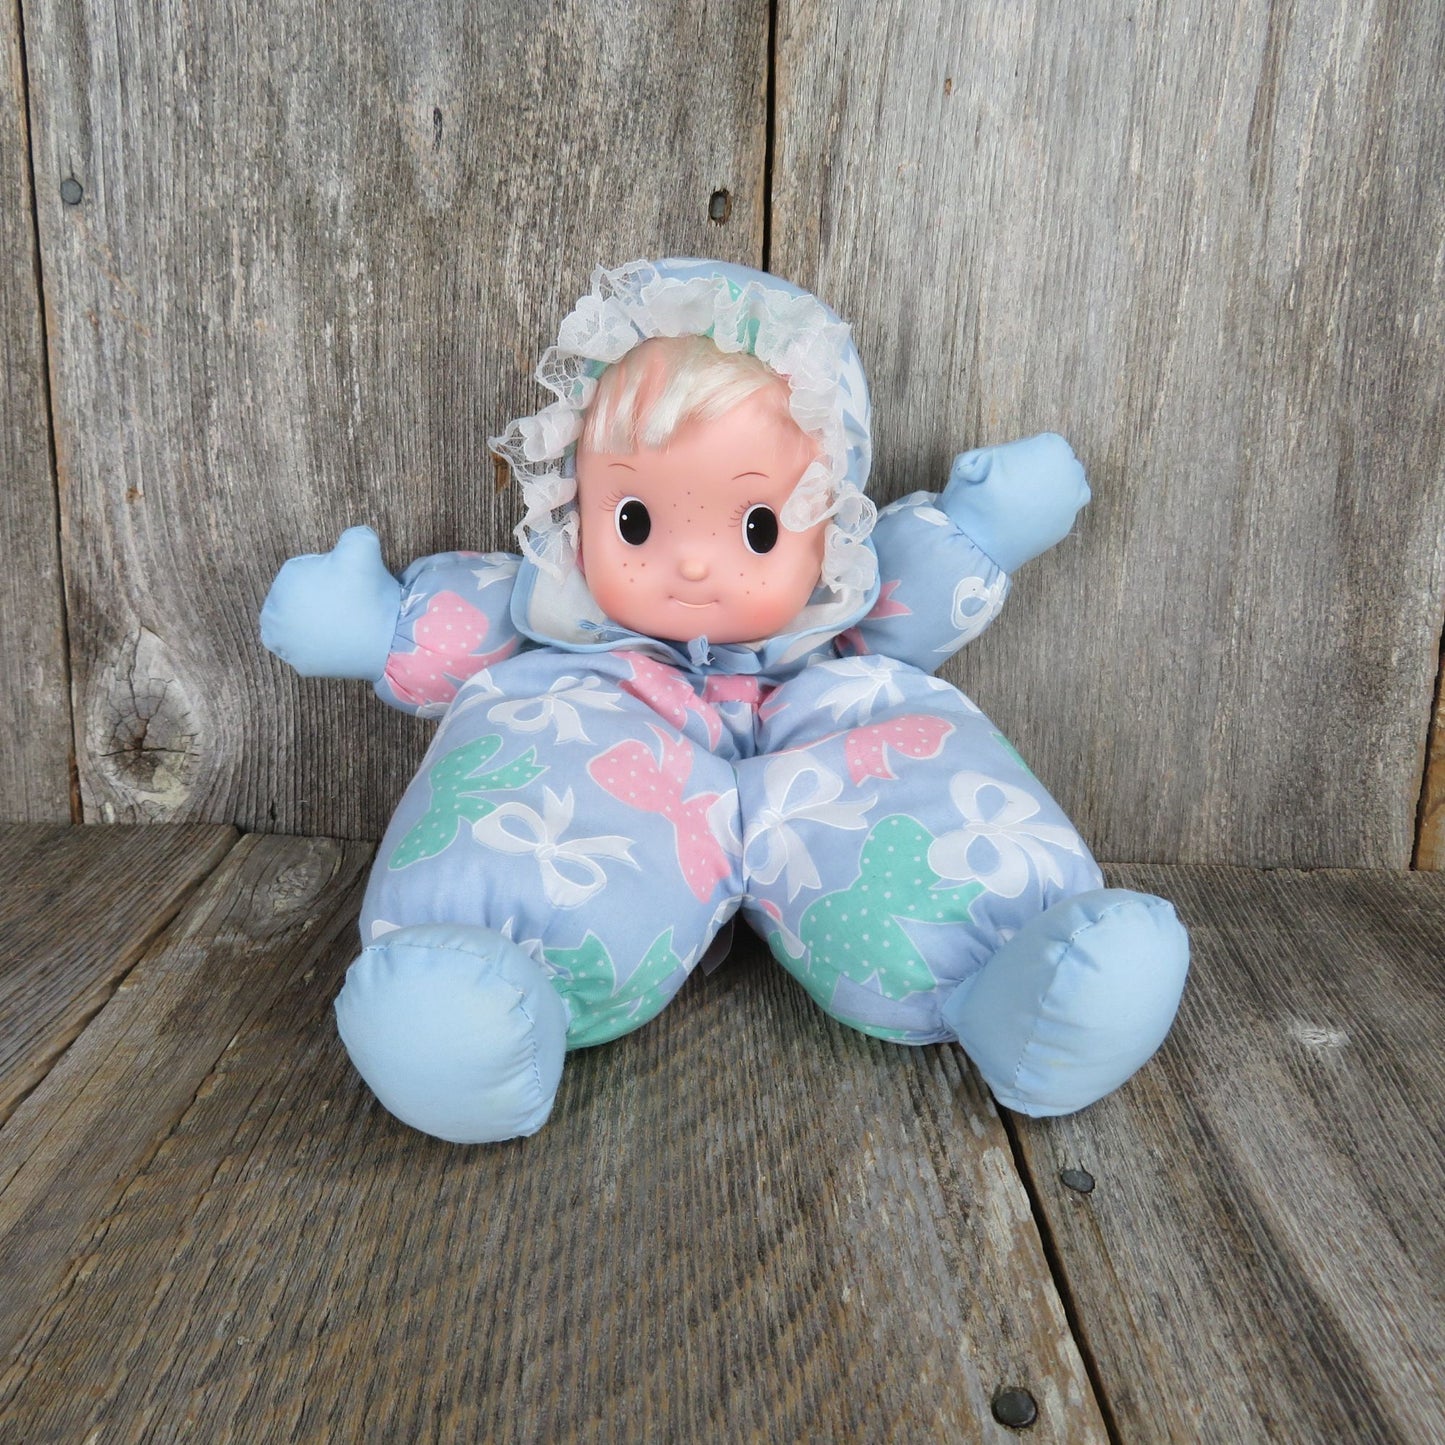 Vintage Soft Body Doll Plush Rubber Face Uneeda Blue Fabric Pink Green Bows Lace Big Eyes